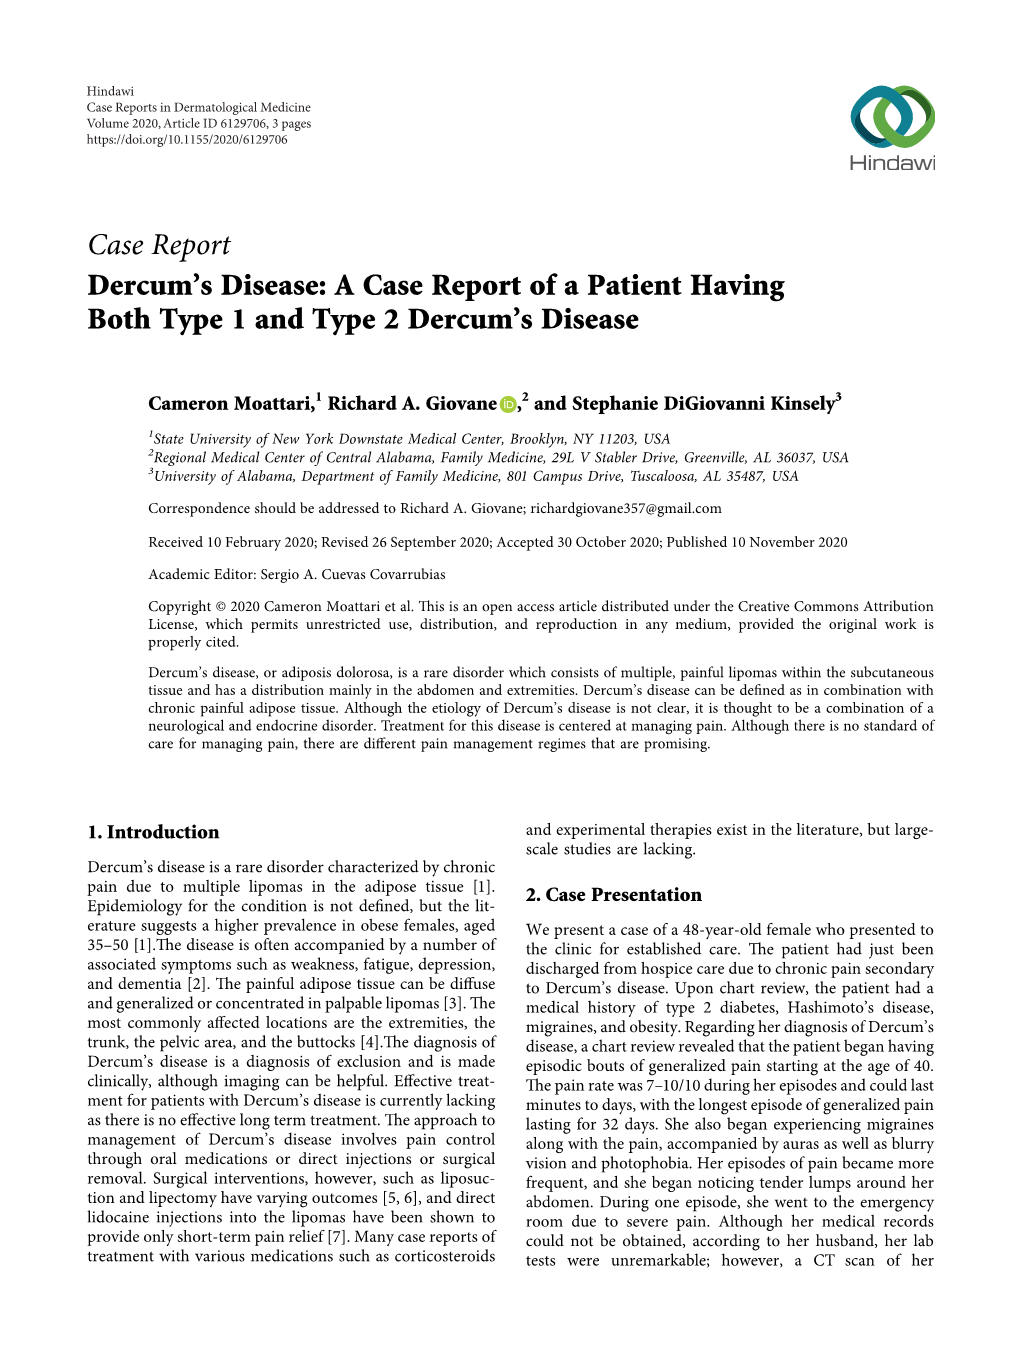 A Case Report of a Patient Having Both Type 1 and Type 2 Dercum's